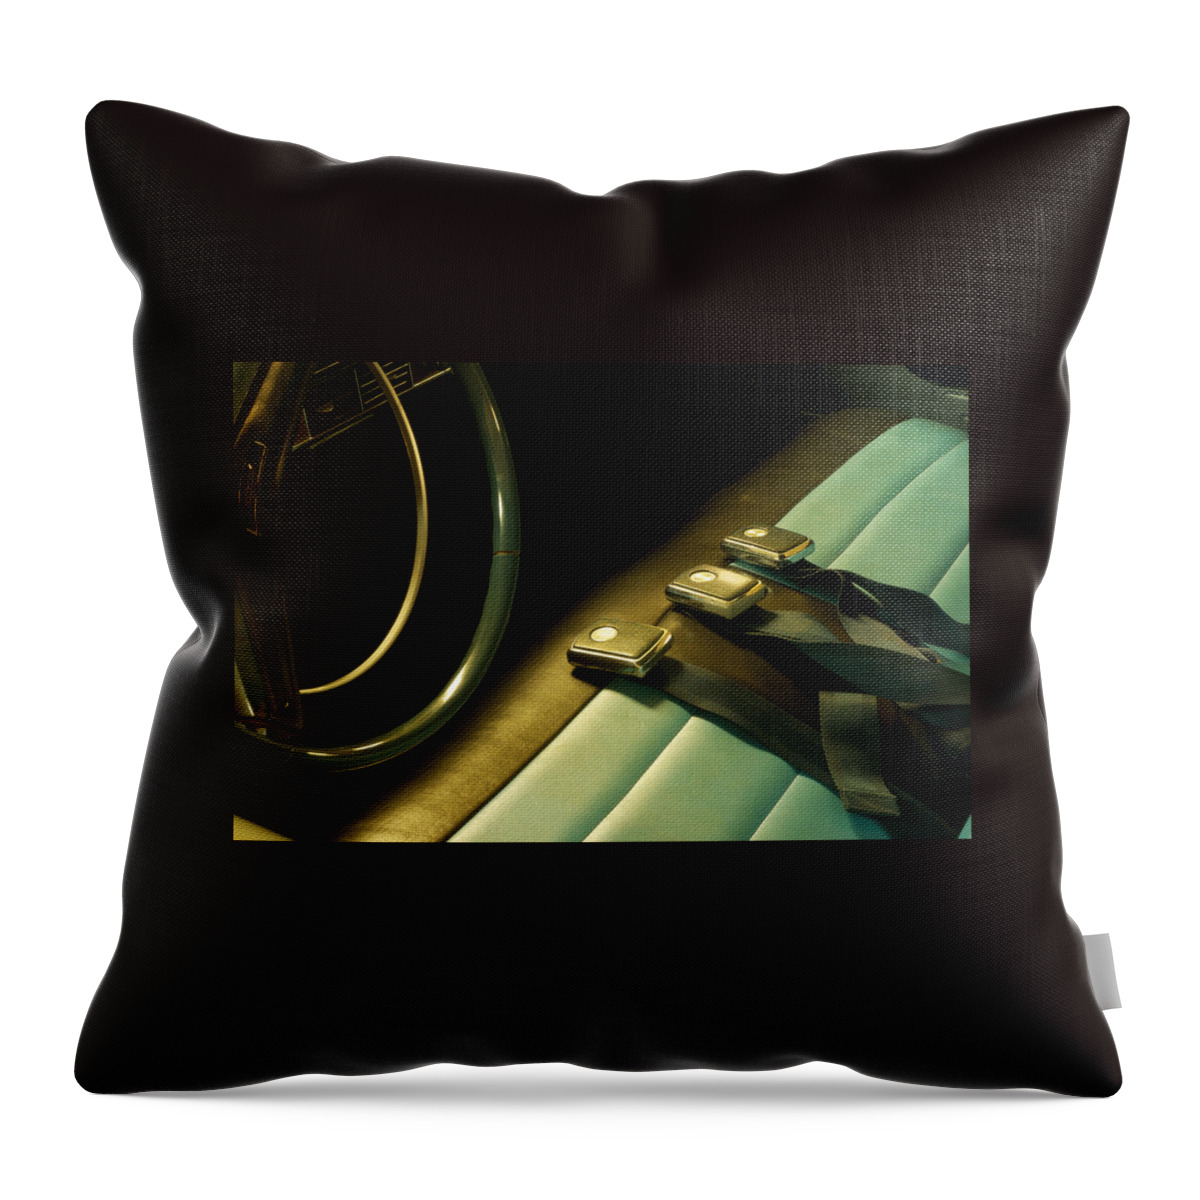 Transportation Throw Pillow featuring the photograph Laid Out Flat by Mary Lee Dereske